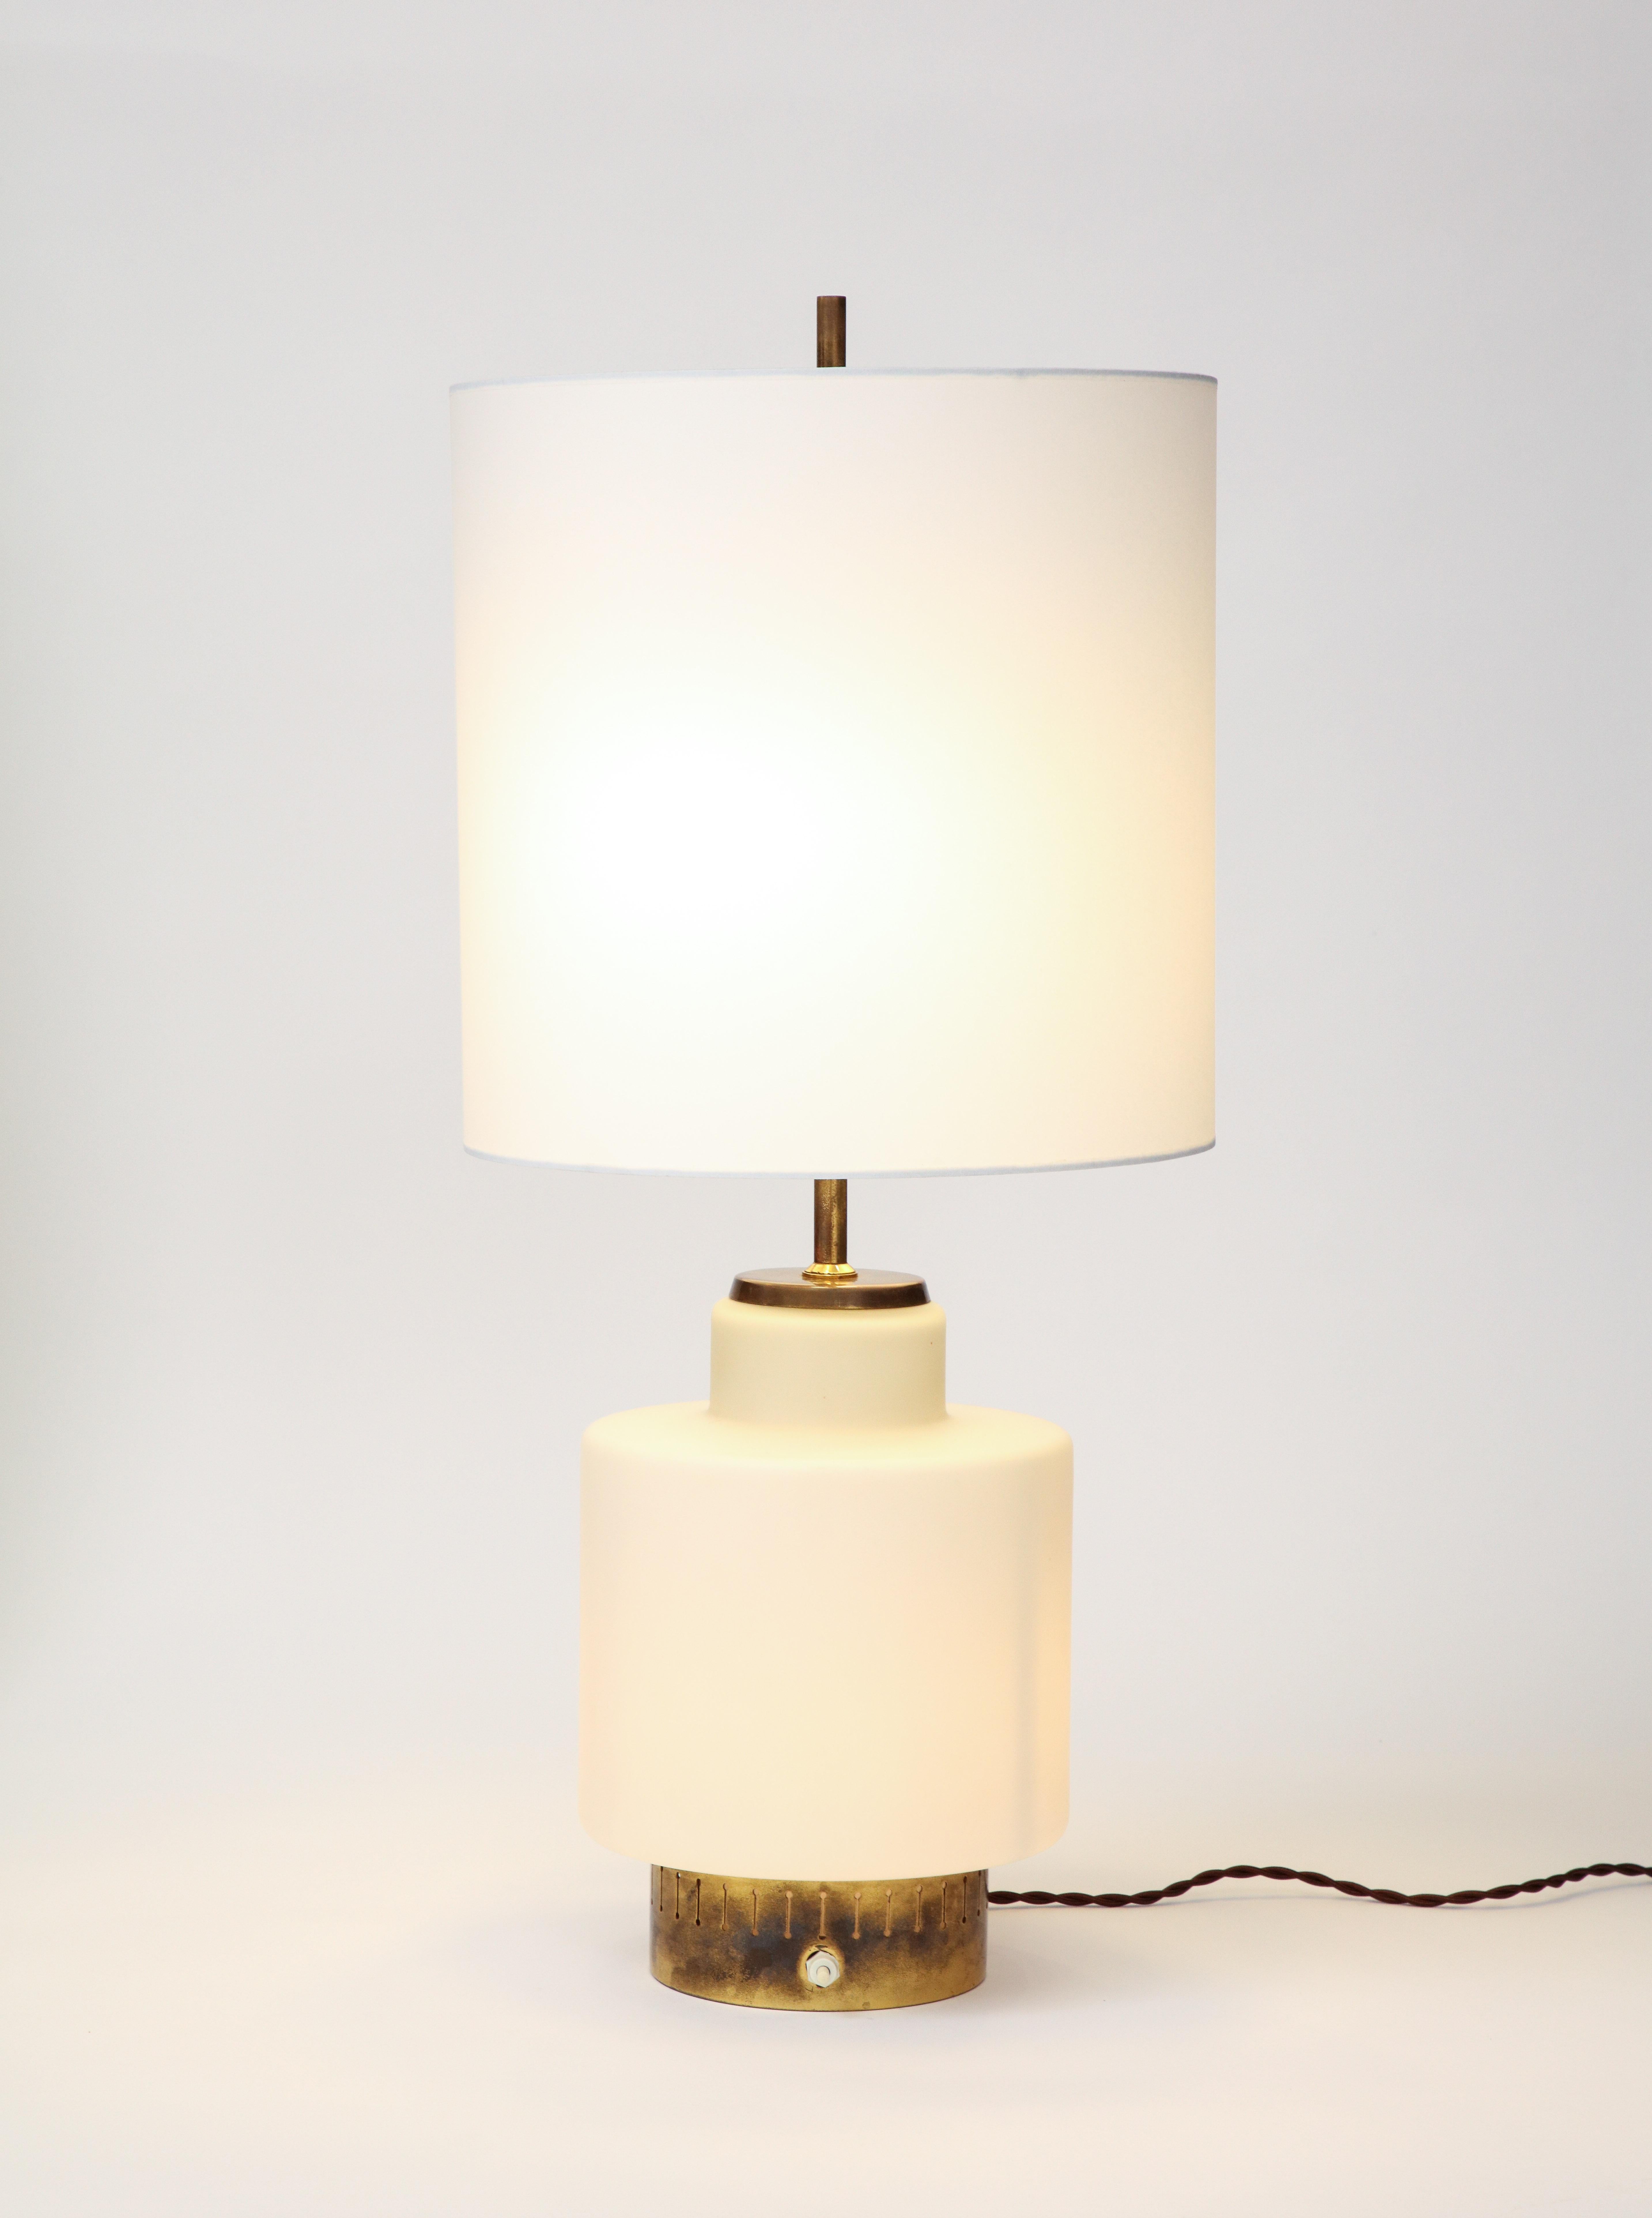 Stilnovo Opaline & Brass Lamp, mod. 8055, Parchment Shade, Italy, c. 1950's For Sale 1